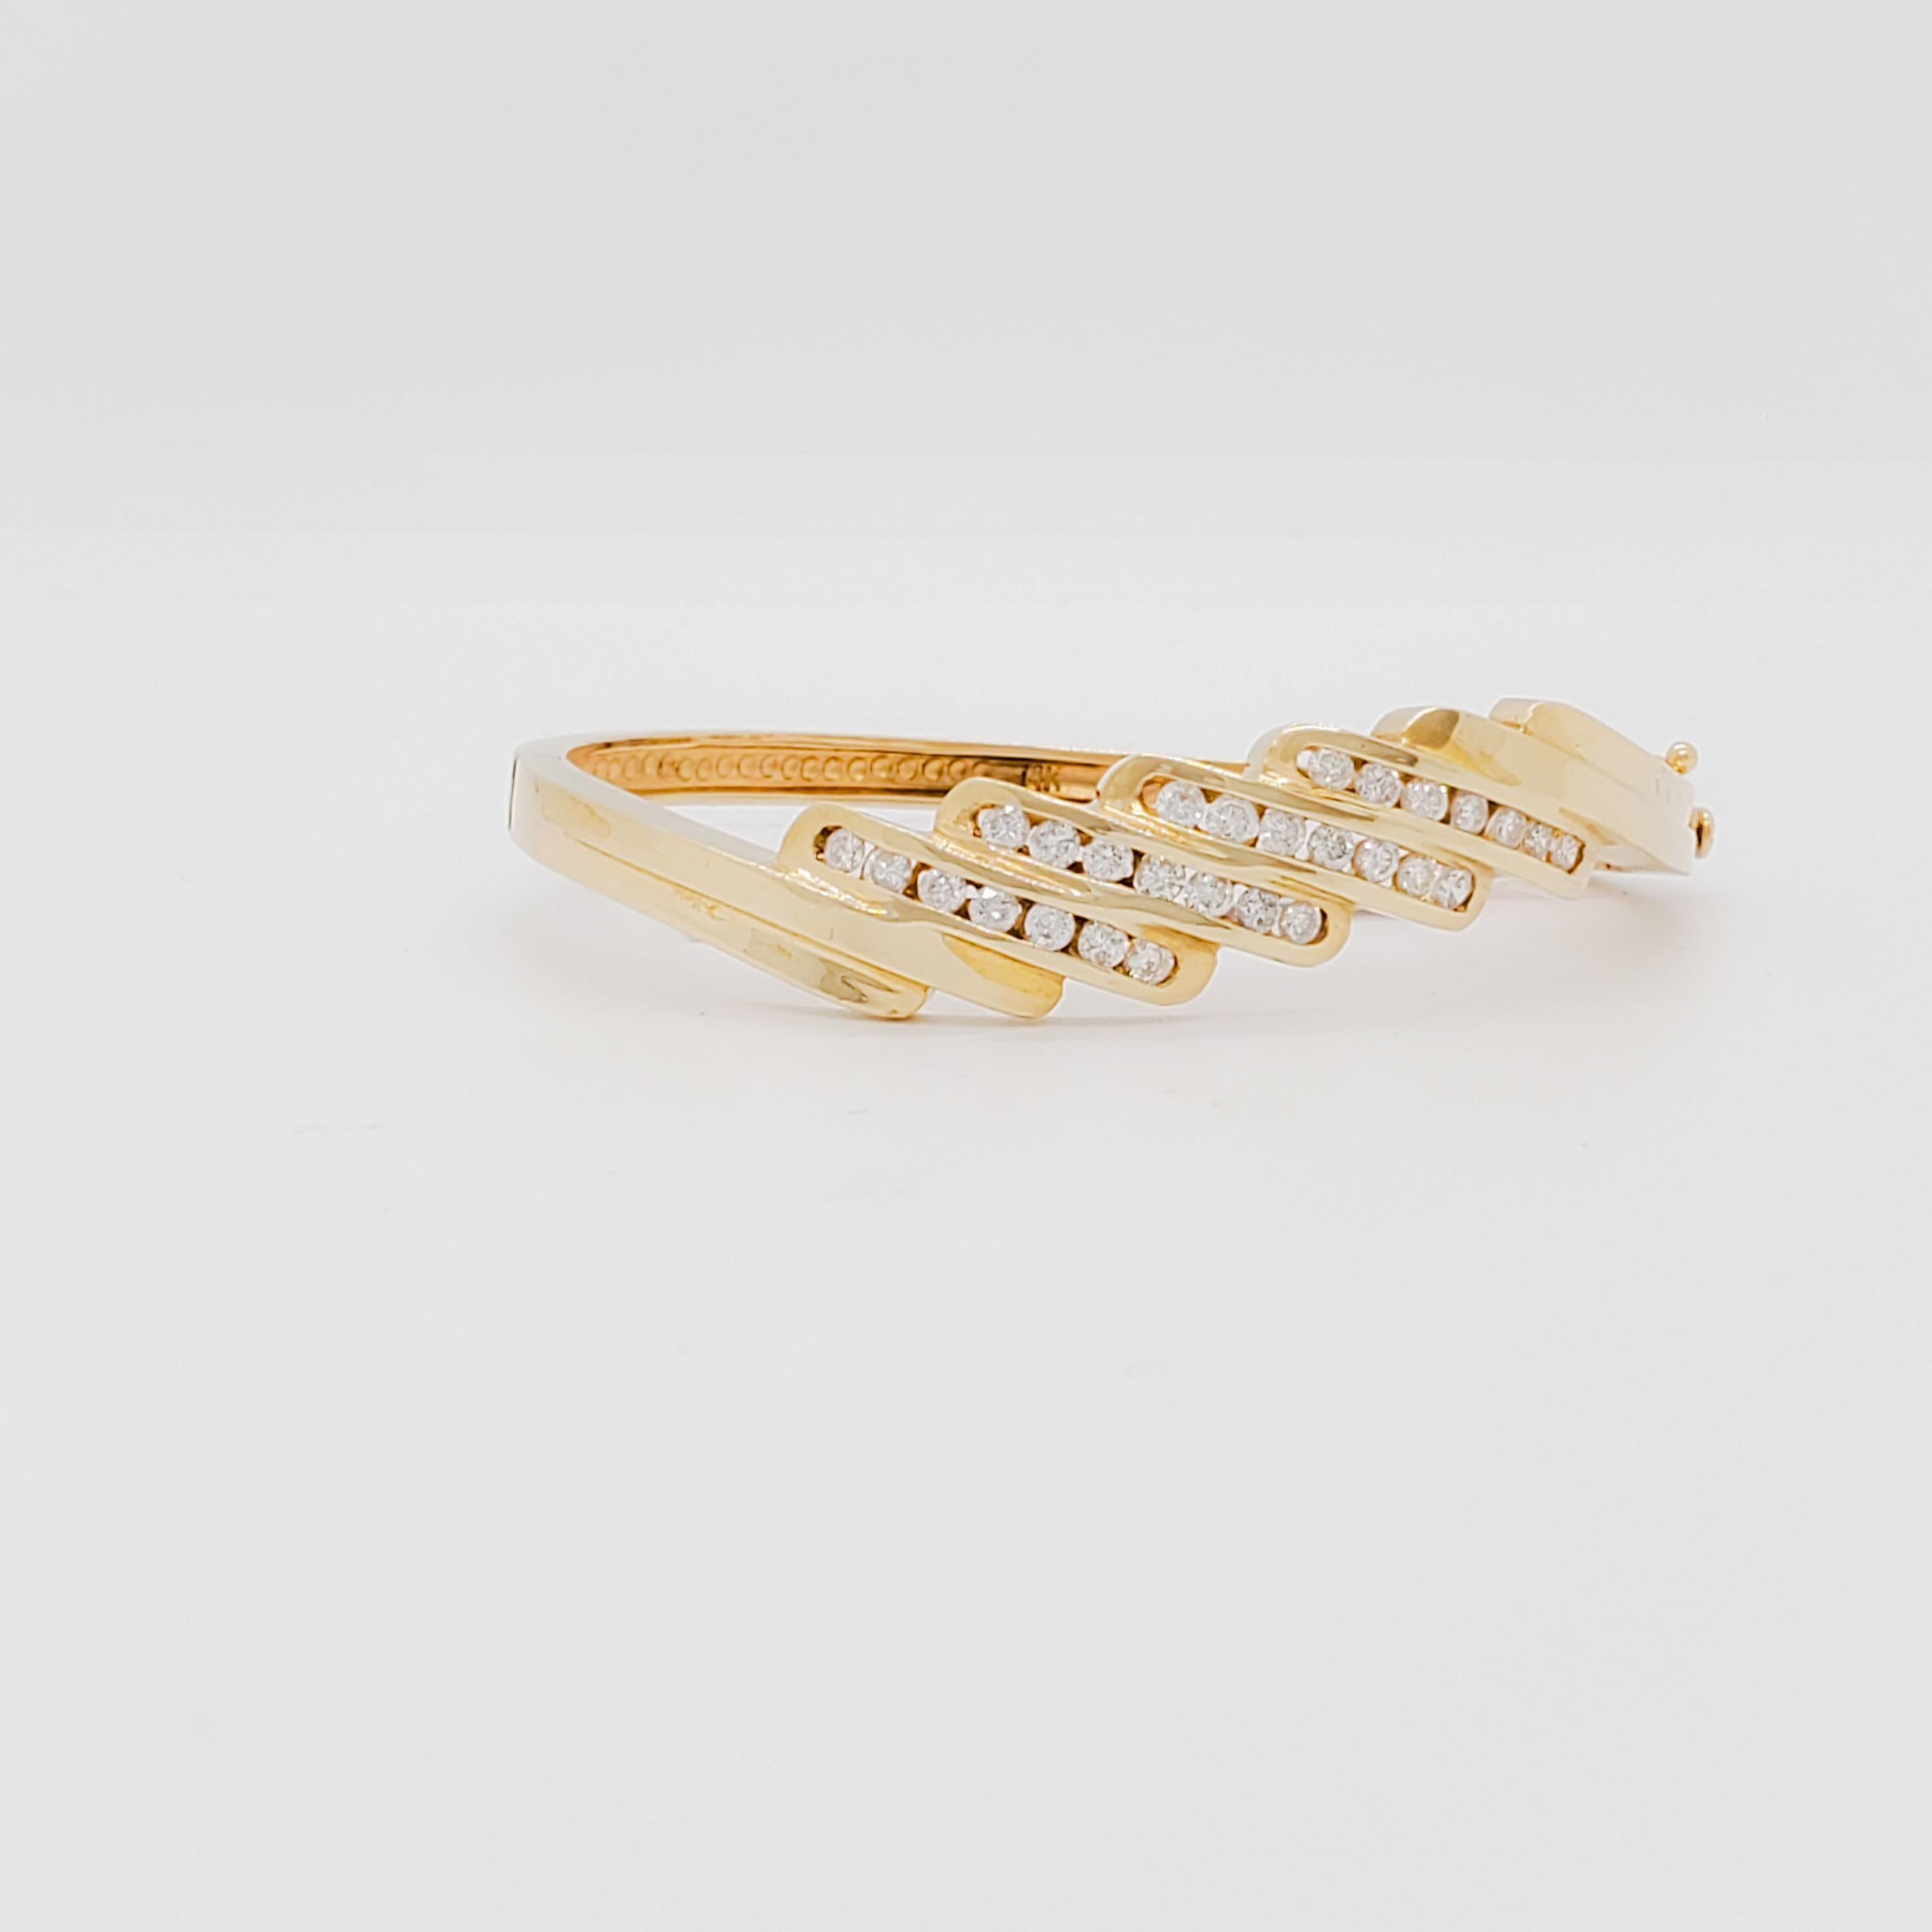 Beautiful 14k yellow gold bangle with 1.50 ct. good quality, white, and bright diamond rounds.  Handmade.